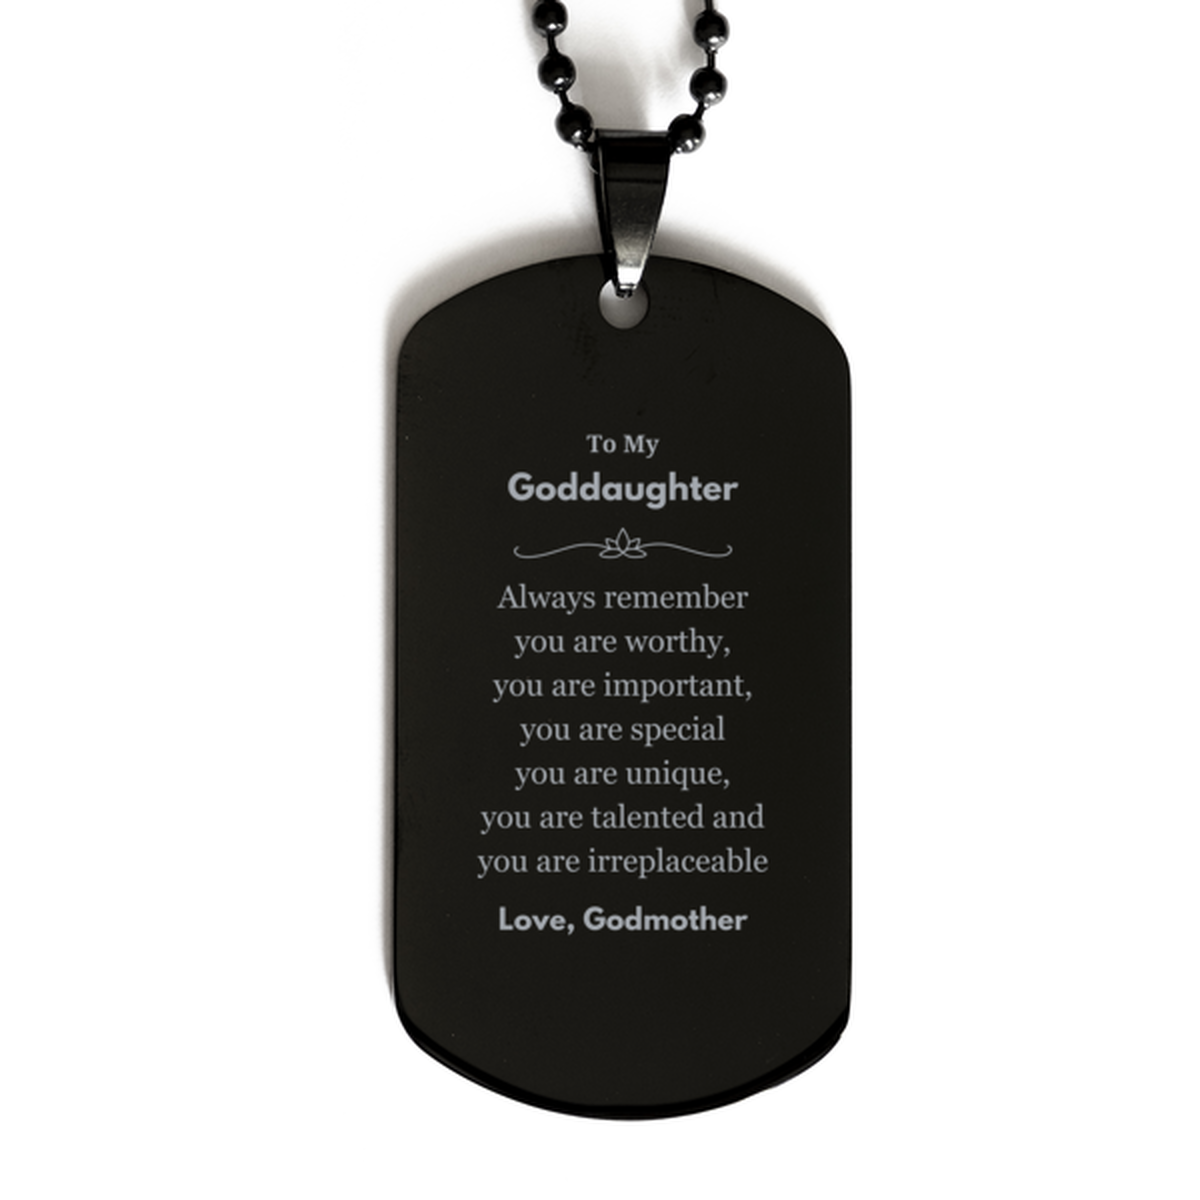 Goddaughter Birthday Gifts from Godmother, Inspirational Black Dog Tag for Goddaughter Christmas Graduation Gifts for Goddaughter Always remember you are worthy, you are important. Love, Godmother